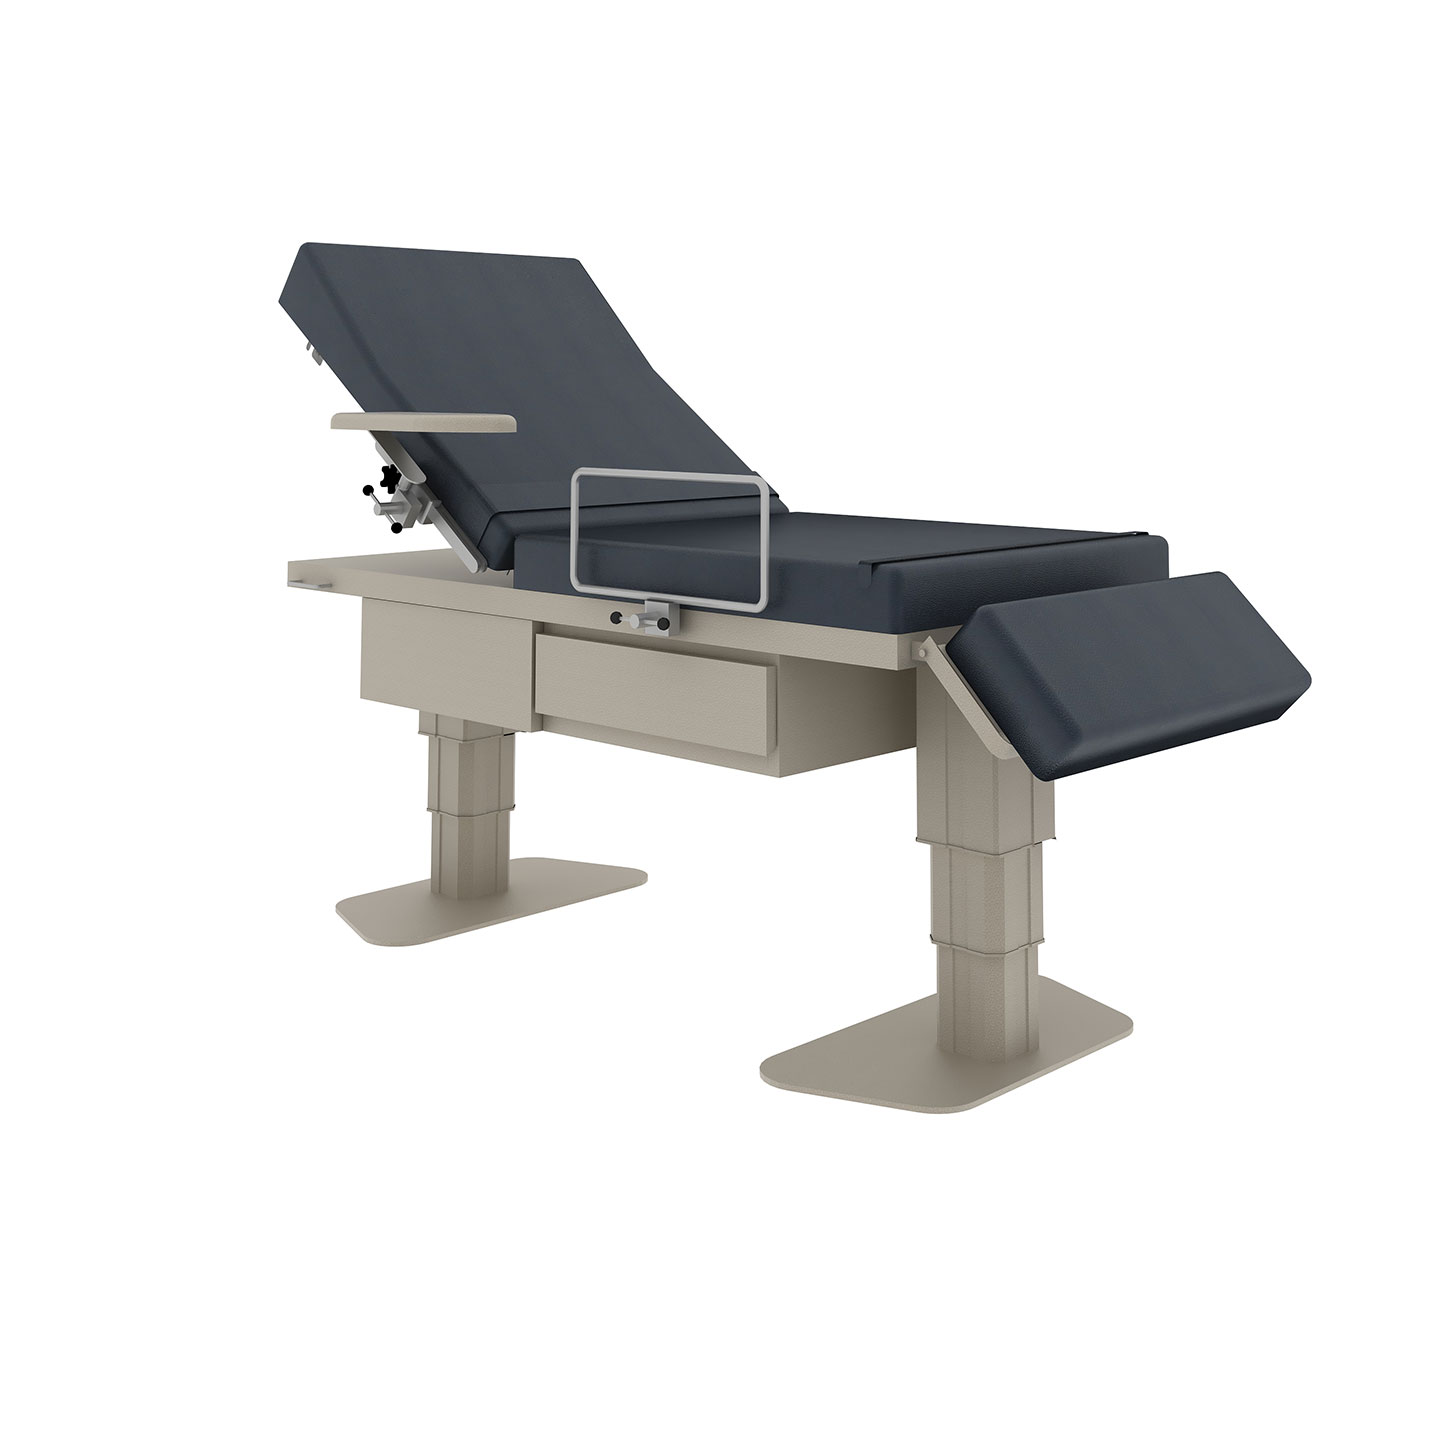 Haworth Power exam table with 2 height adjustable legs and a vinyl upholstery